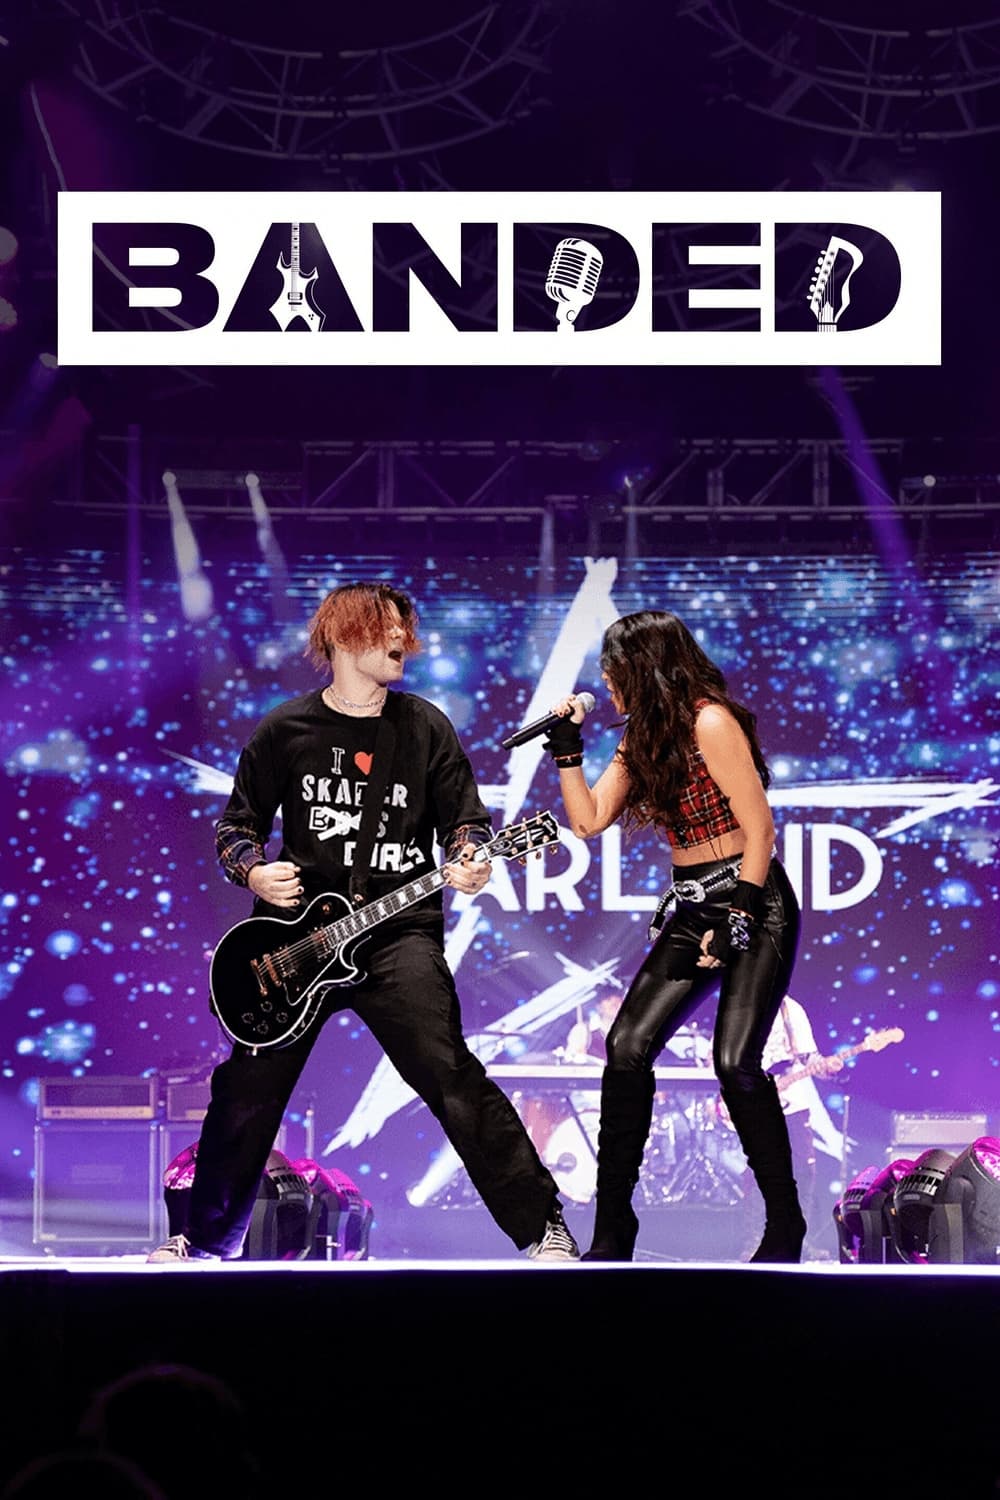 BANDED: The Musician Competition